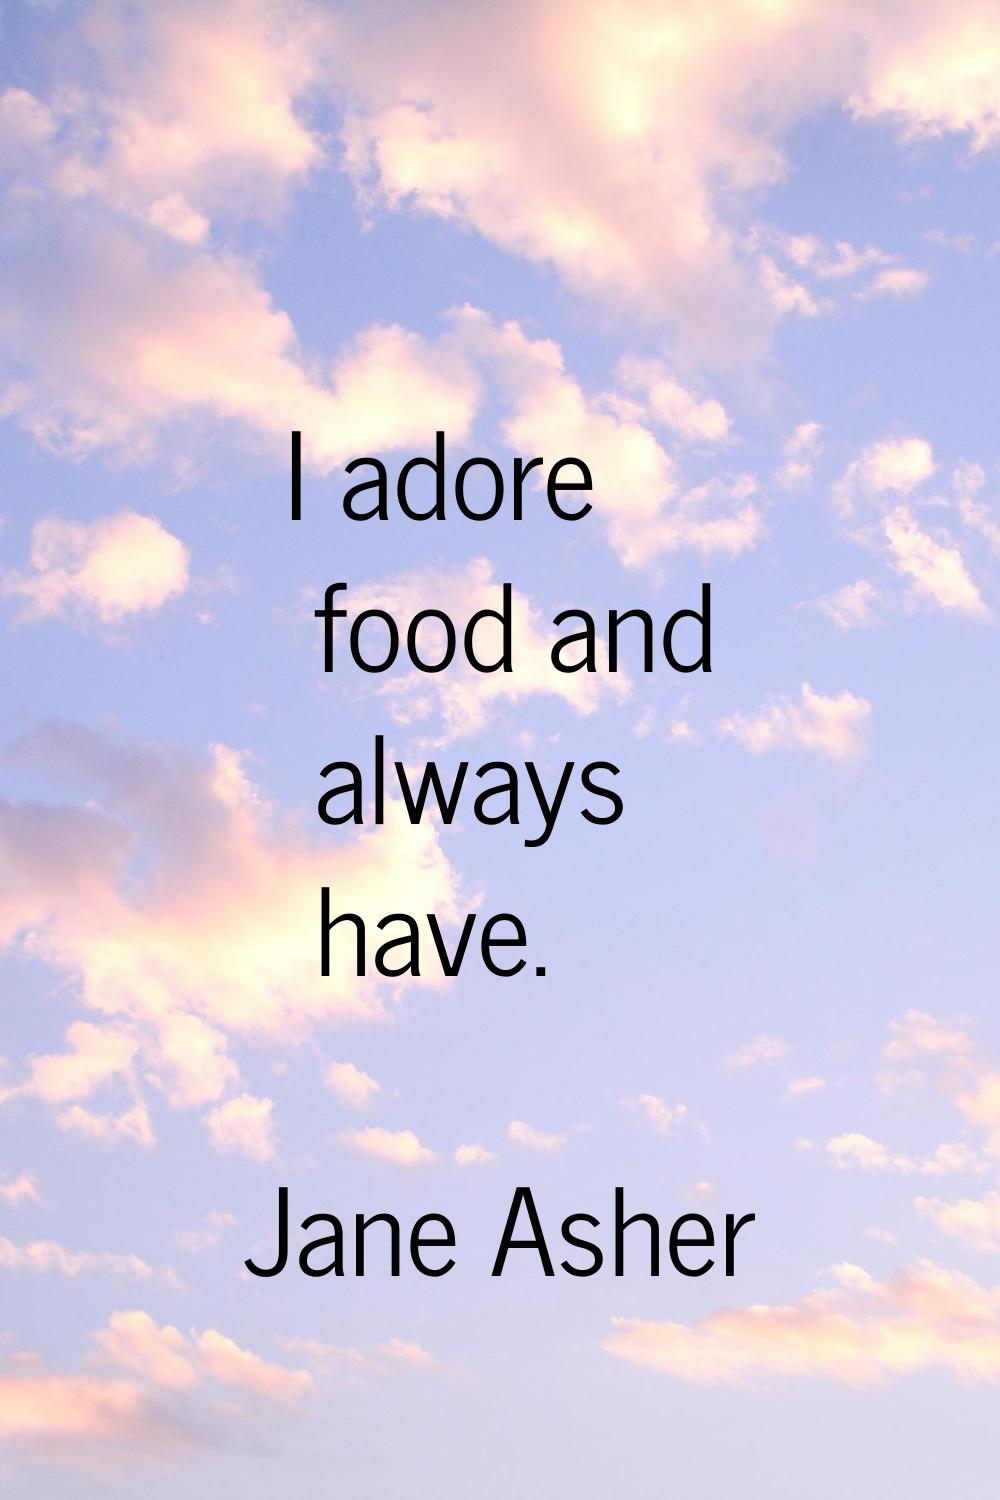 I adore food and always have.